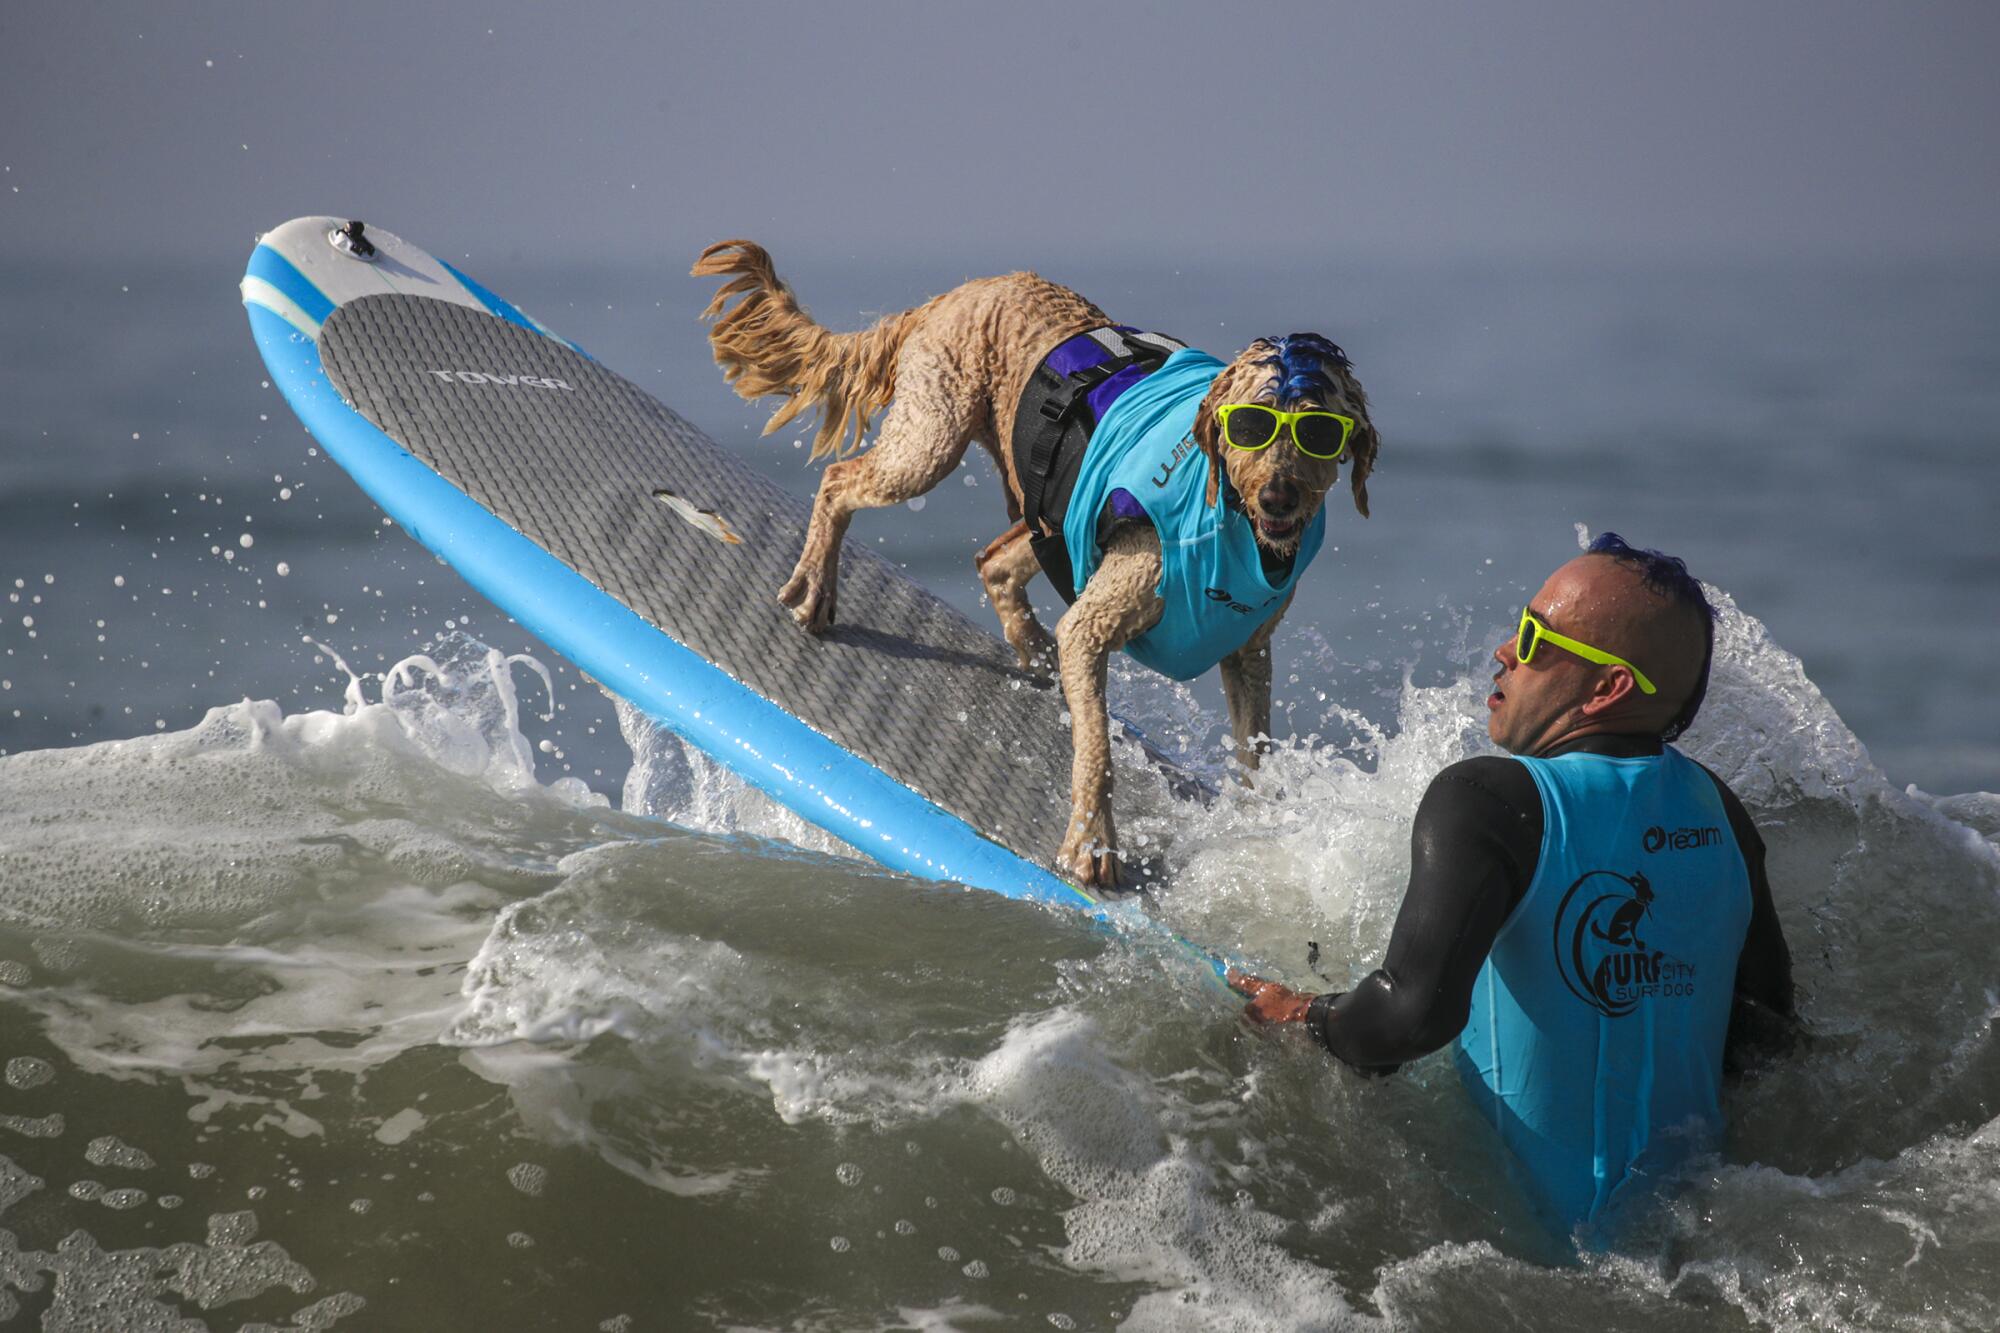 Derby, a 9-year-old Golden Doodle, and Kentucky Gallahue, 41, wait for a good wave.